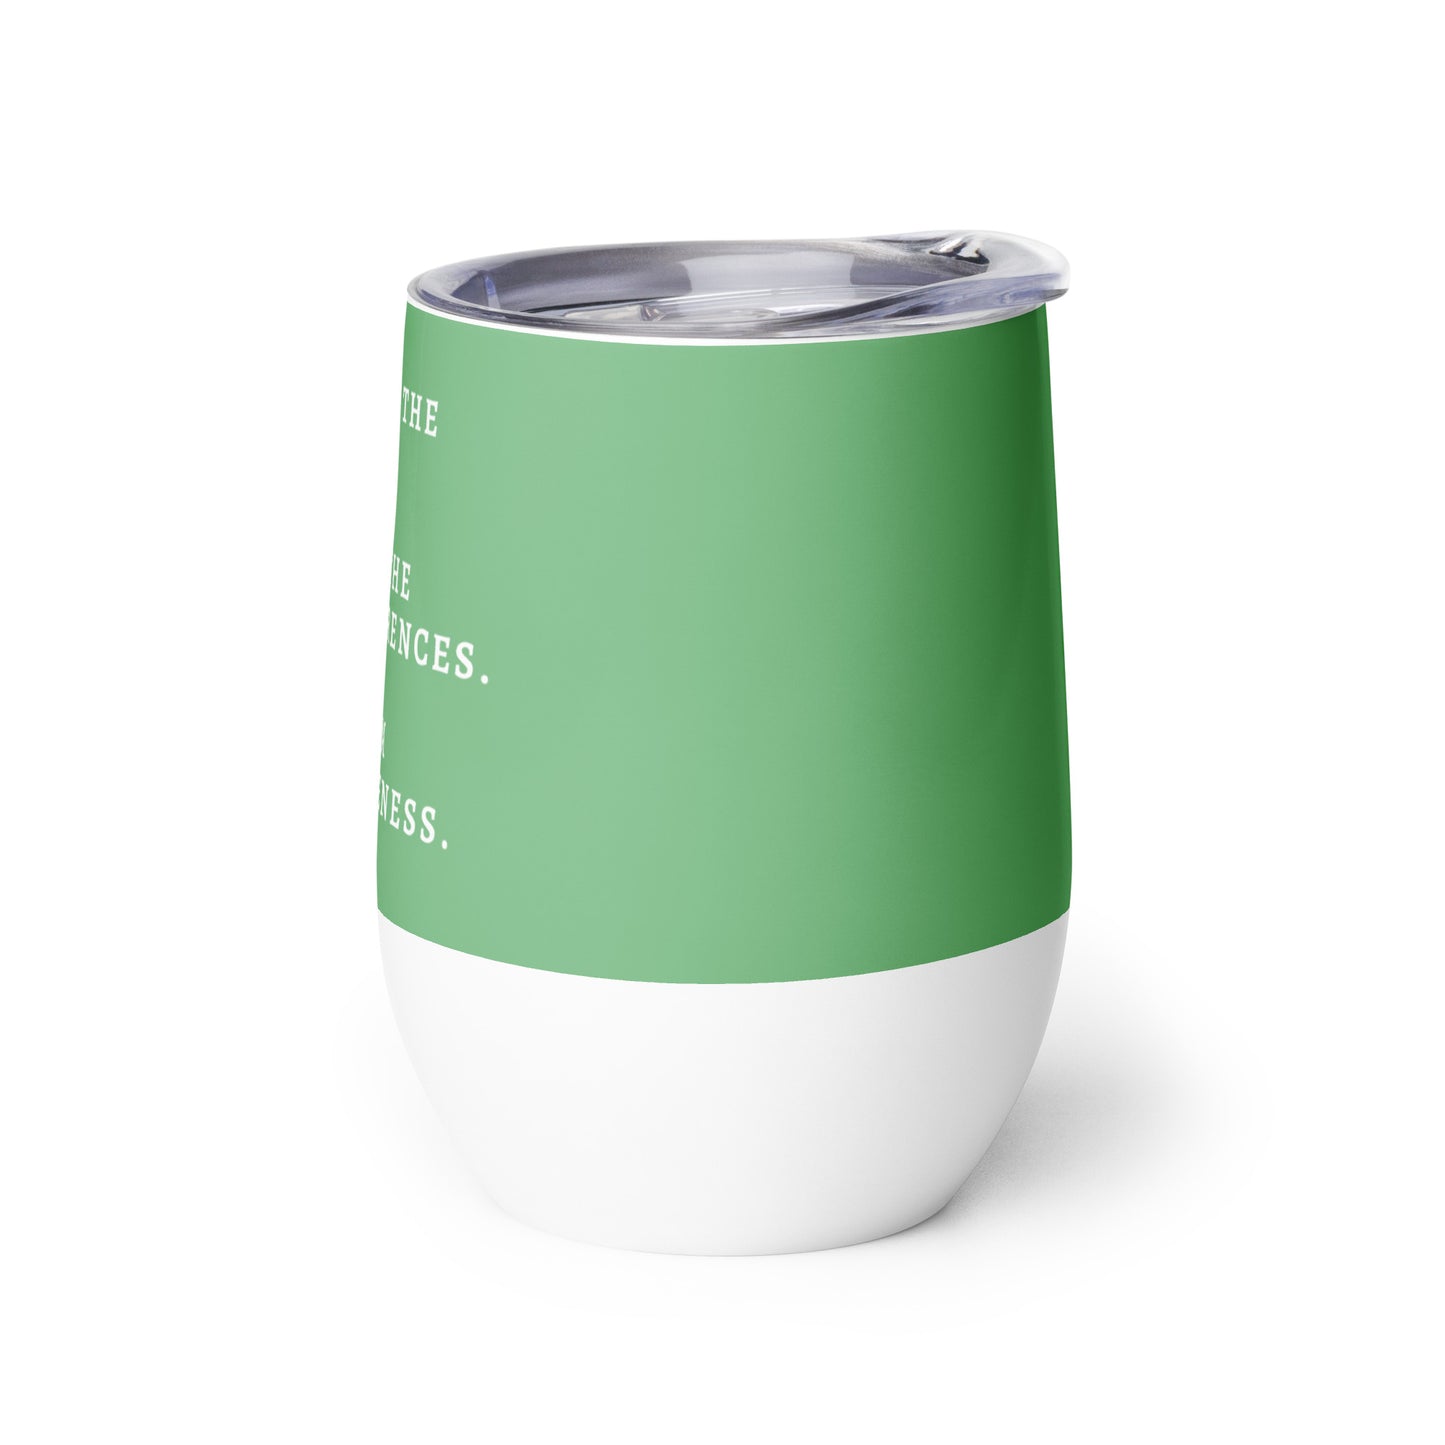 LOVE THE DIFFERENCES GREEN | WINE TUMBLER